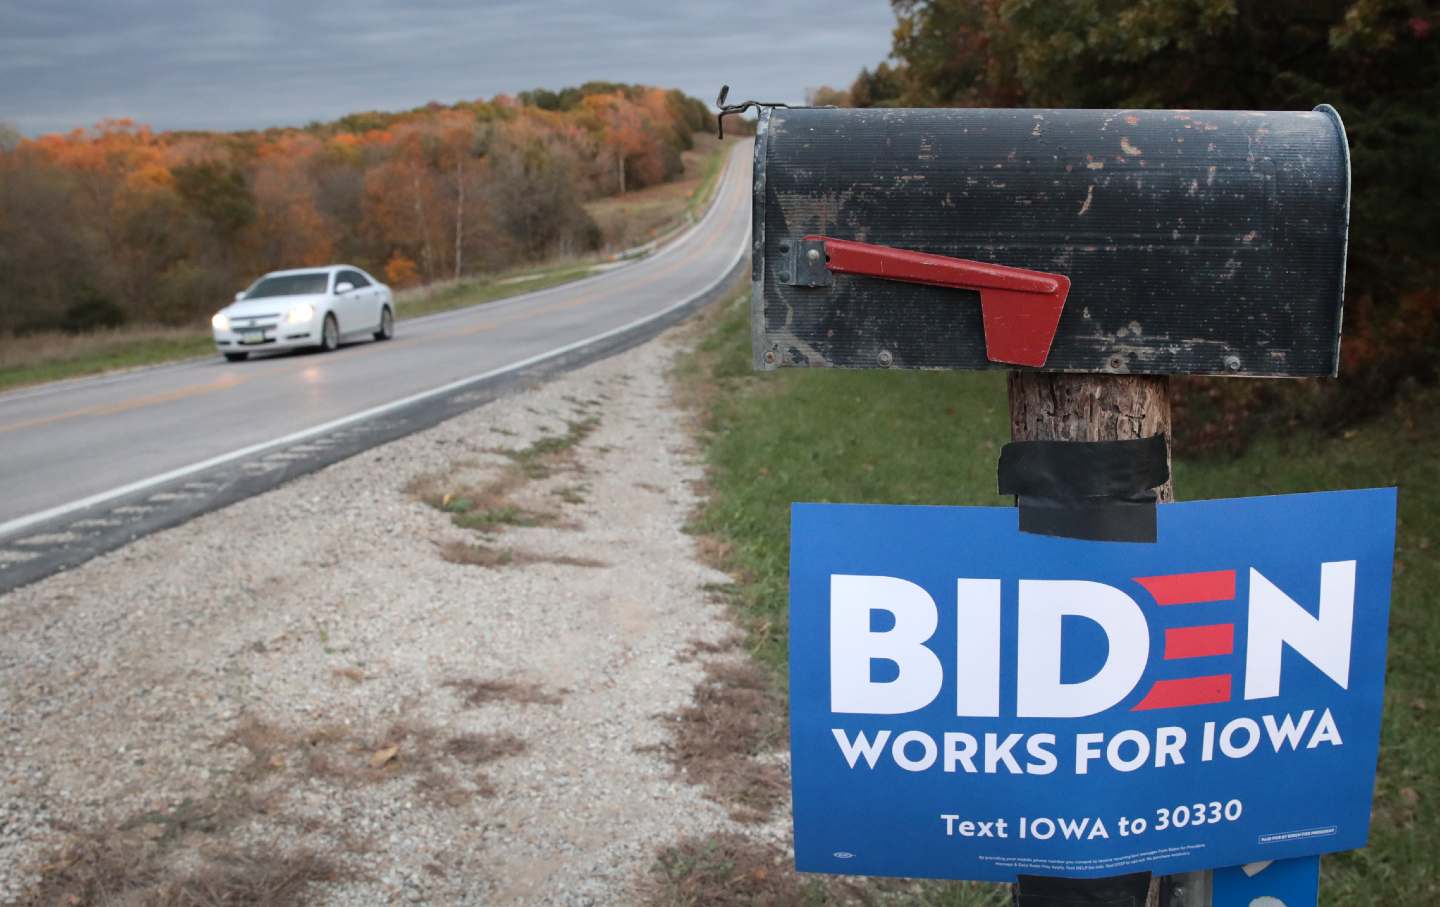 The Biden Campaign Pushed Iowa Staffers to Drive in Dangerous Weather